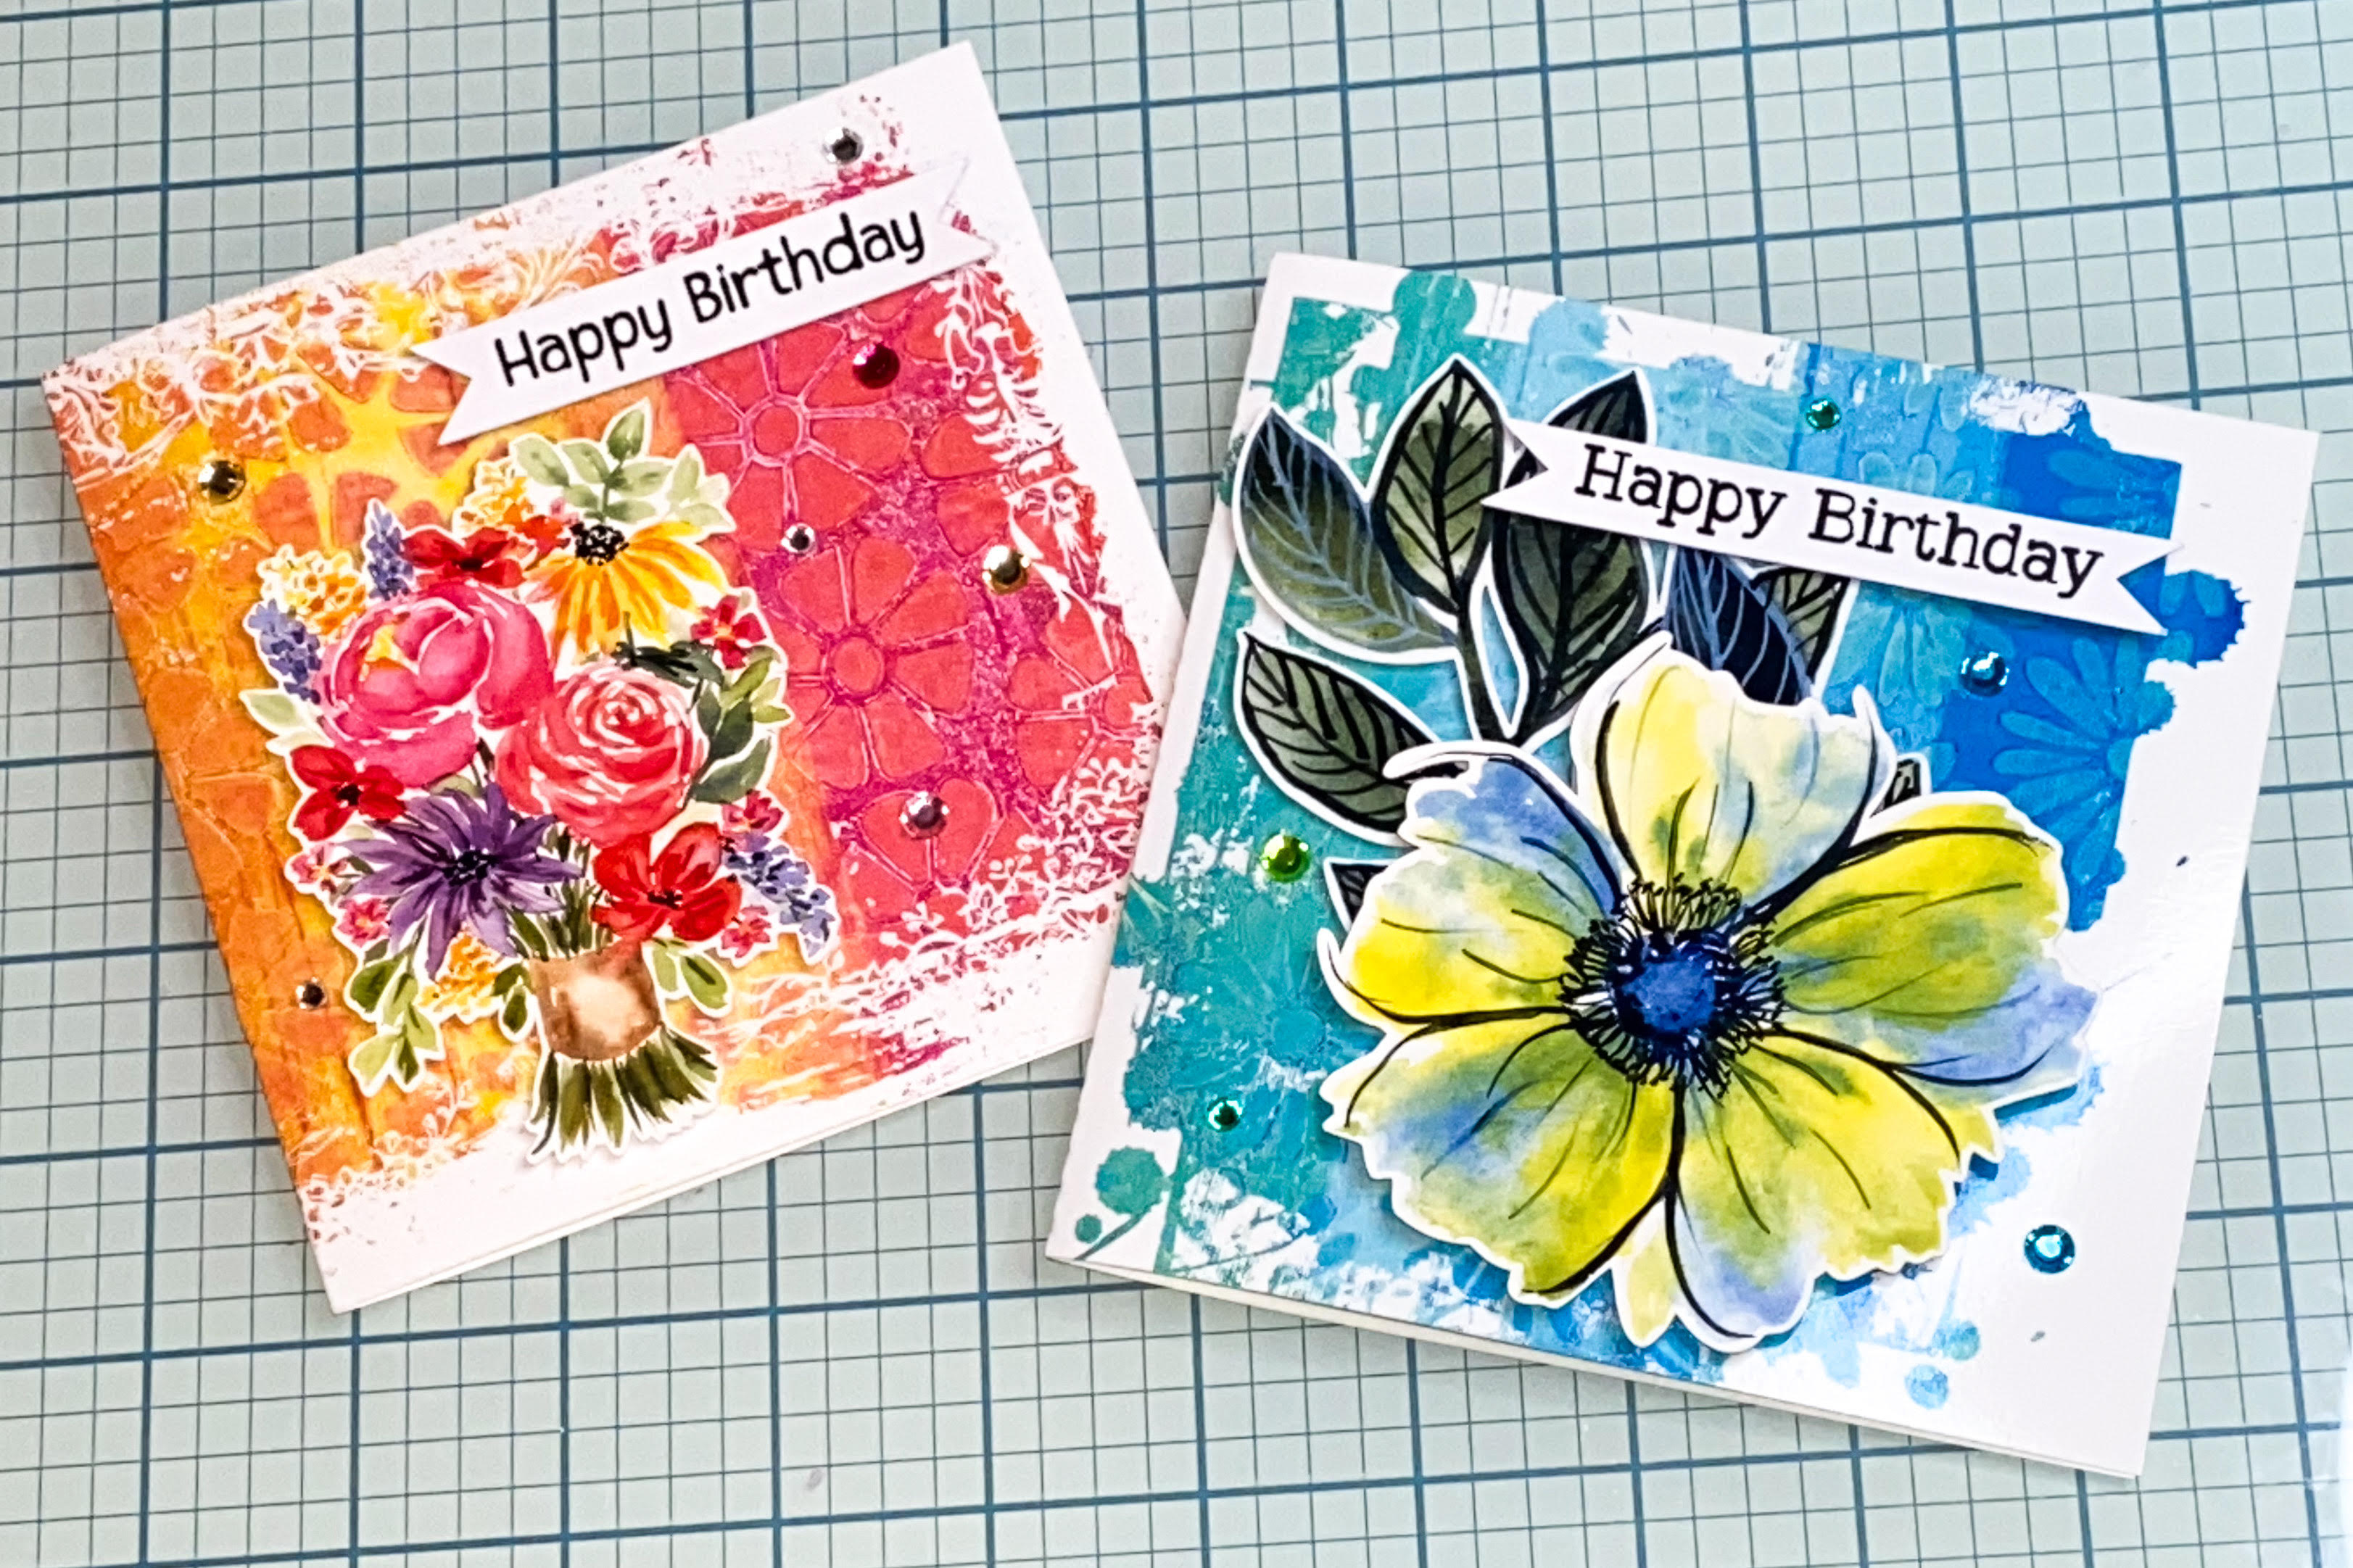 Cards made with Grunge Daisy & Grunge Doodle Flowers Backgrounds, SVG Clipping Masks & Print and Cut flowers